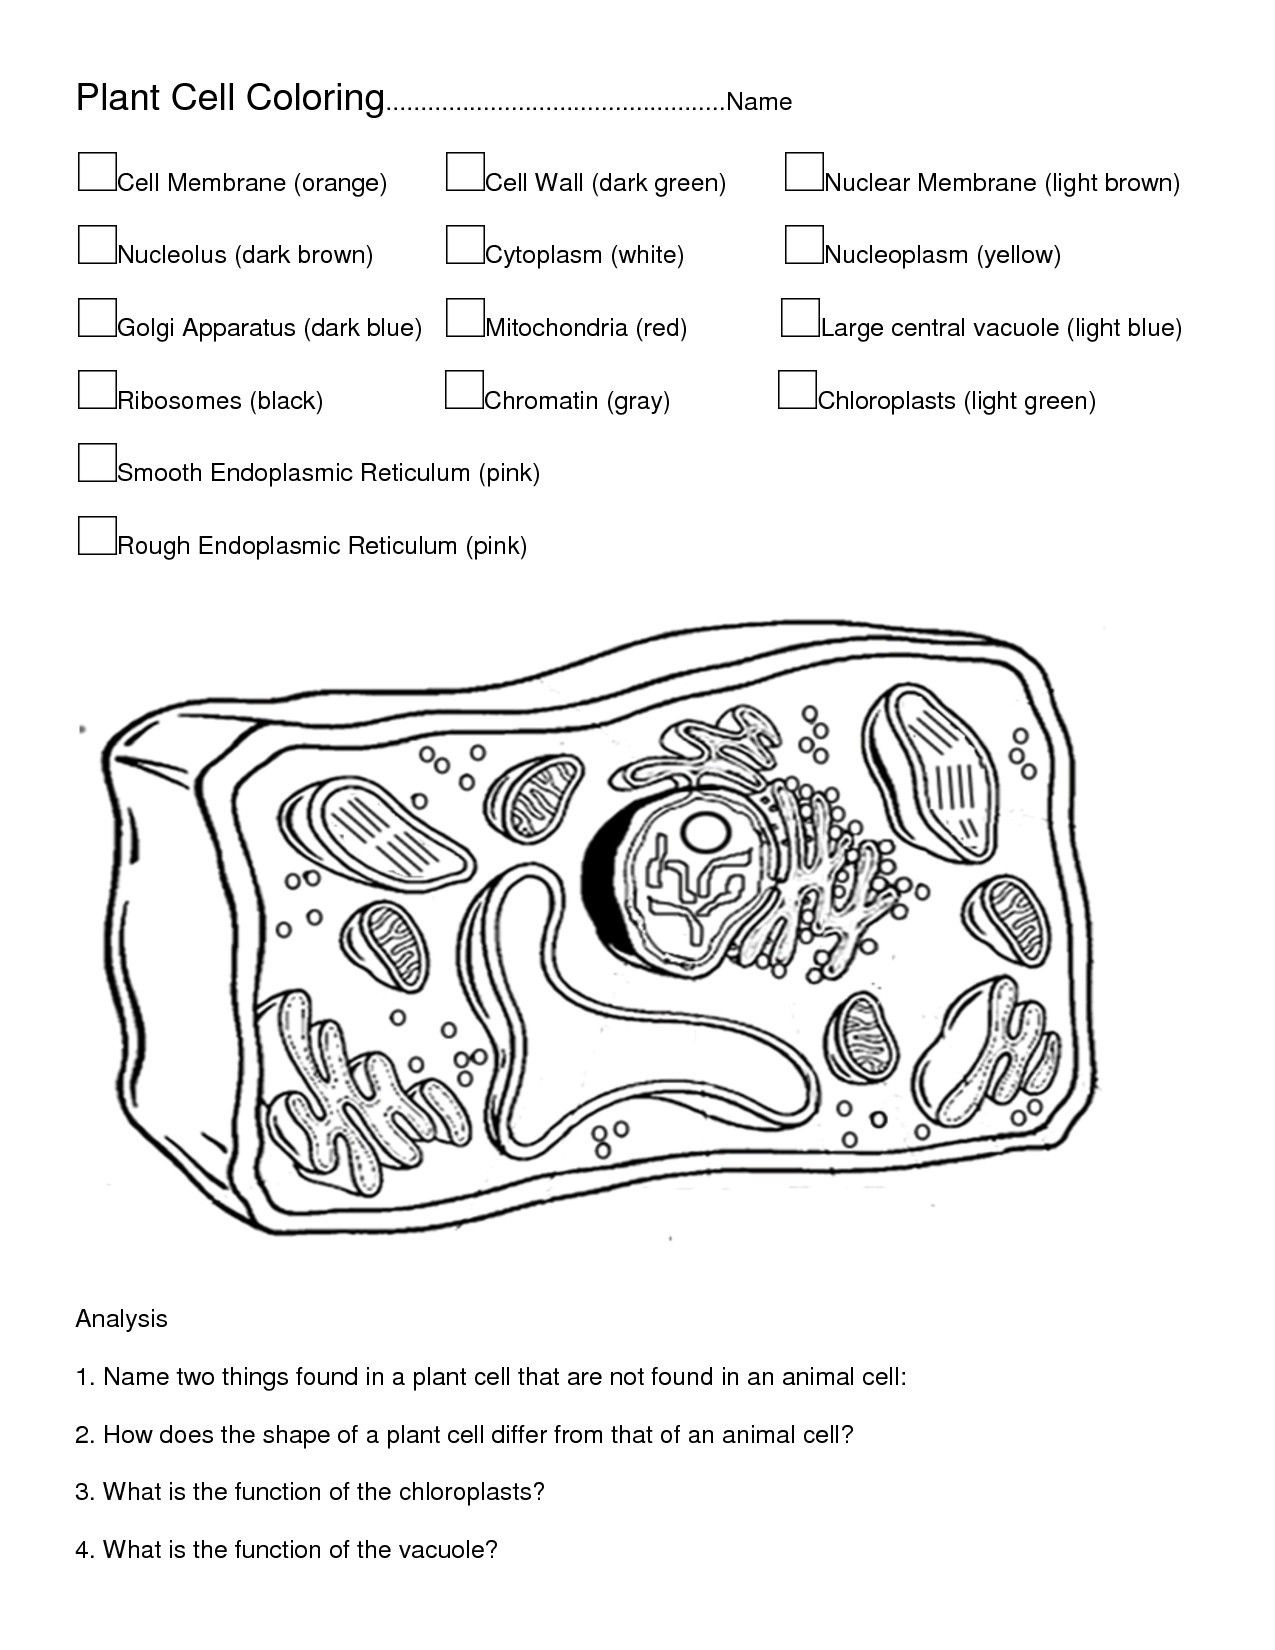 Animal Cell Coloring Worksheet Plant and Animal Cells to Color – Through the